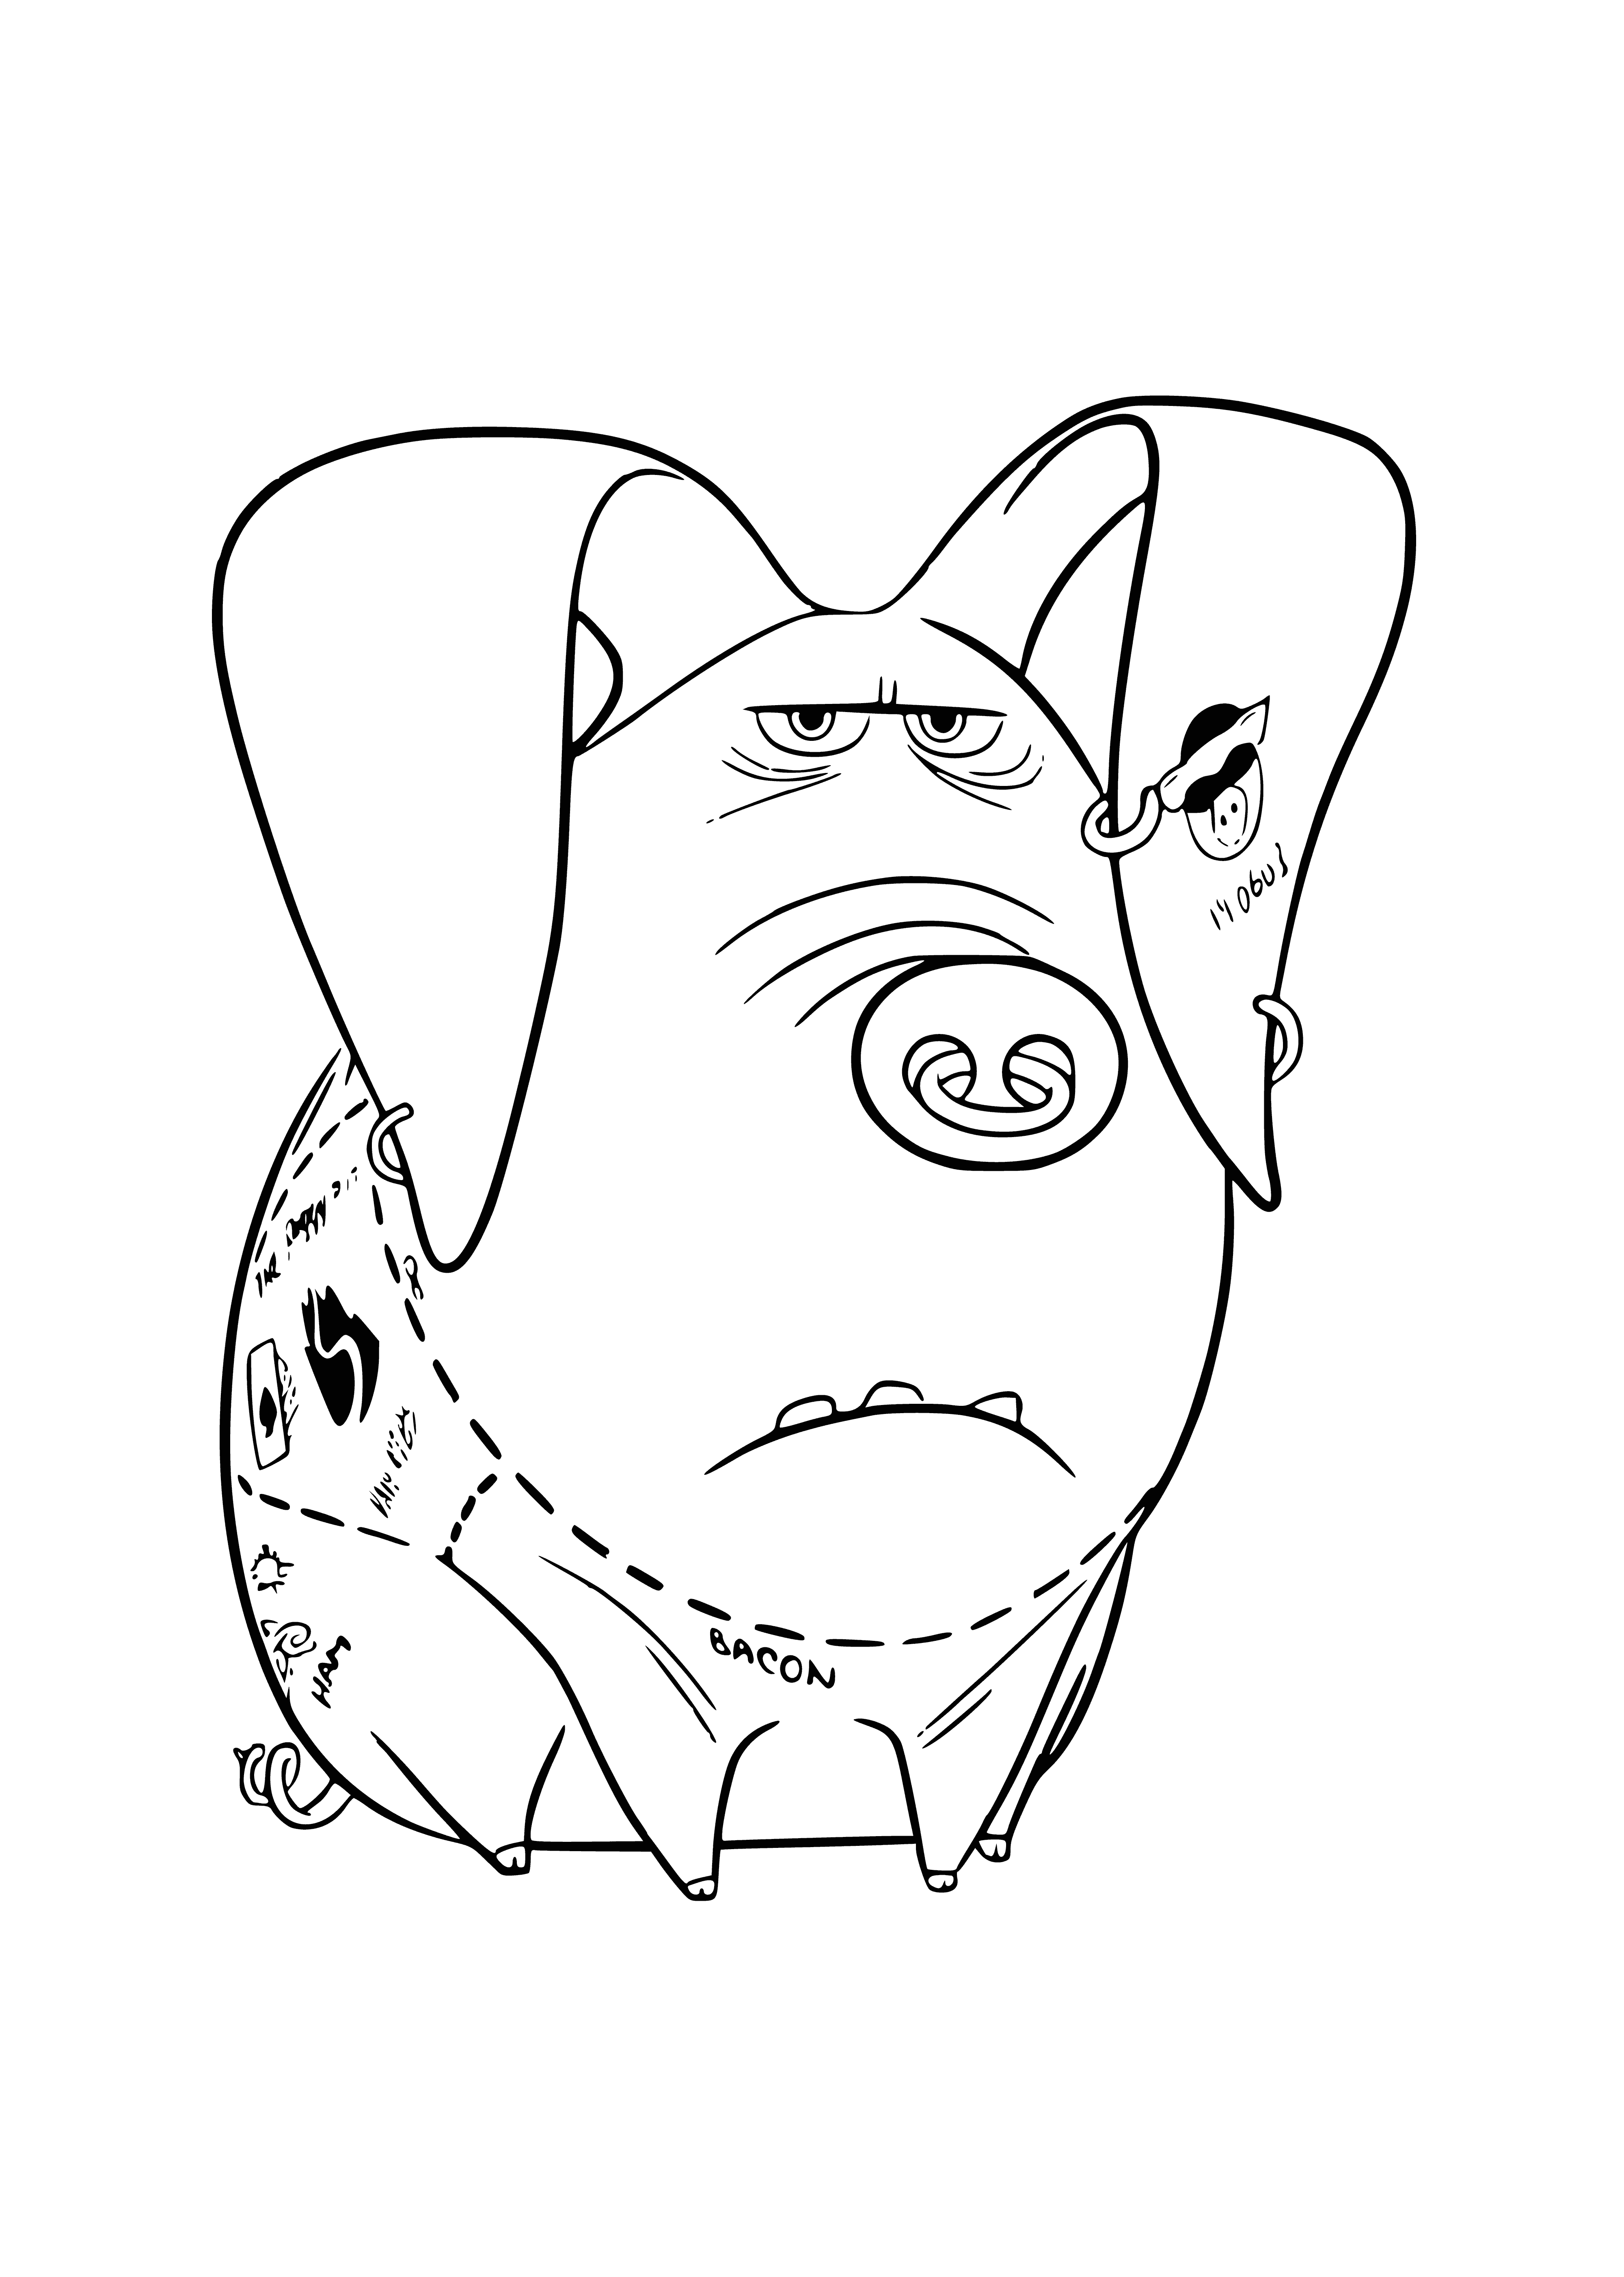 coloring page: Pig sits on floor eating from bowl, window behind it.